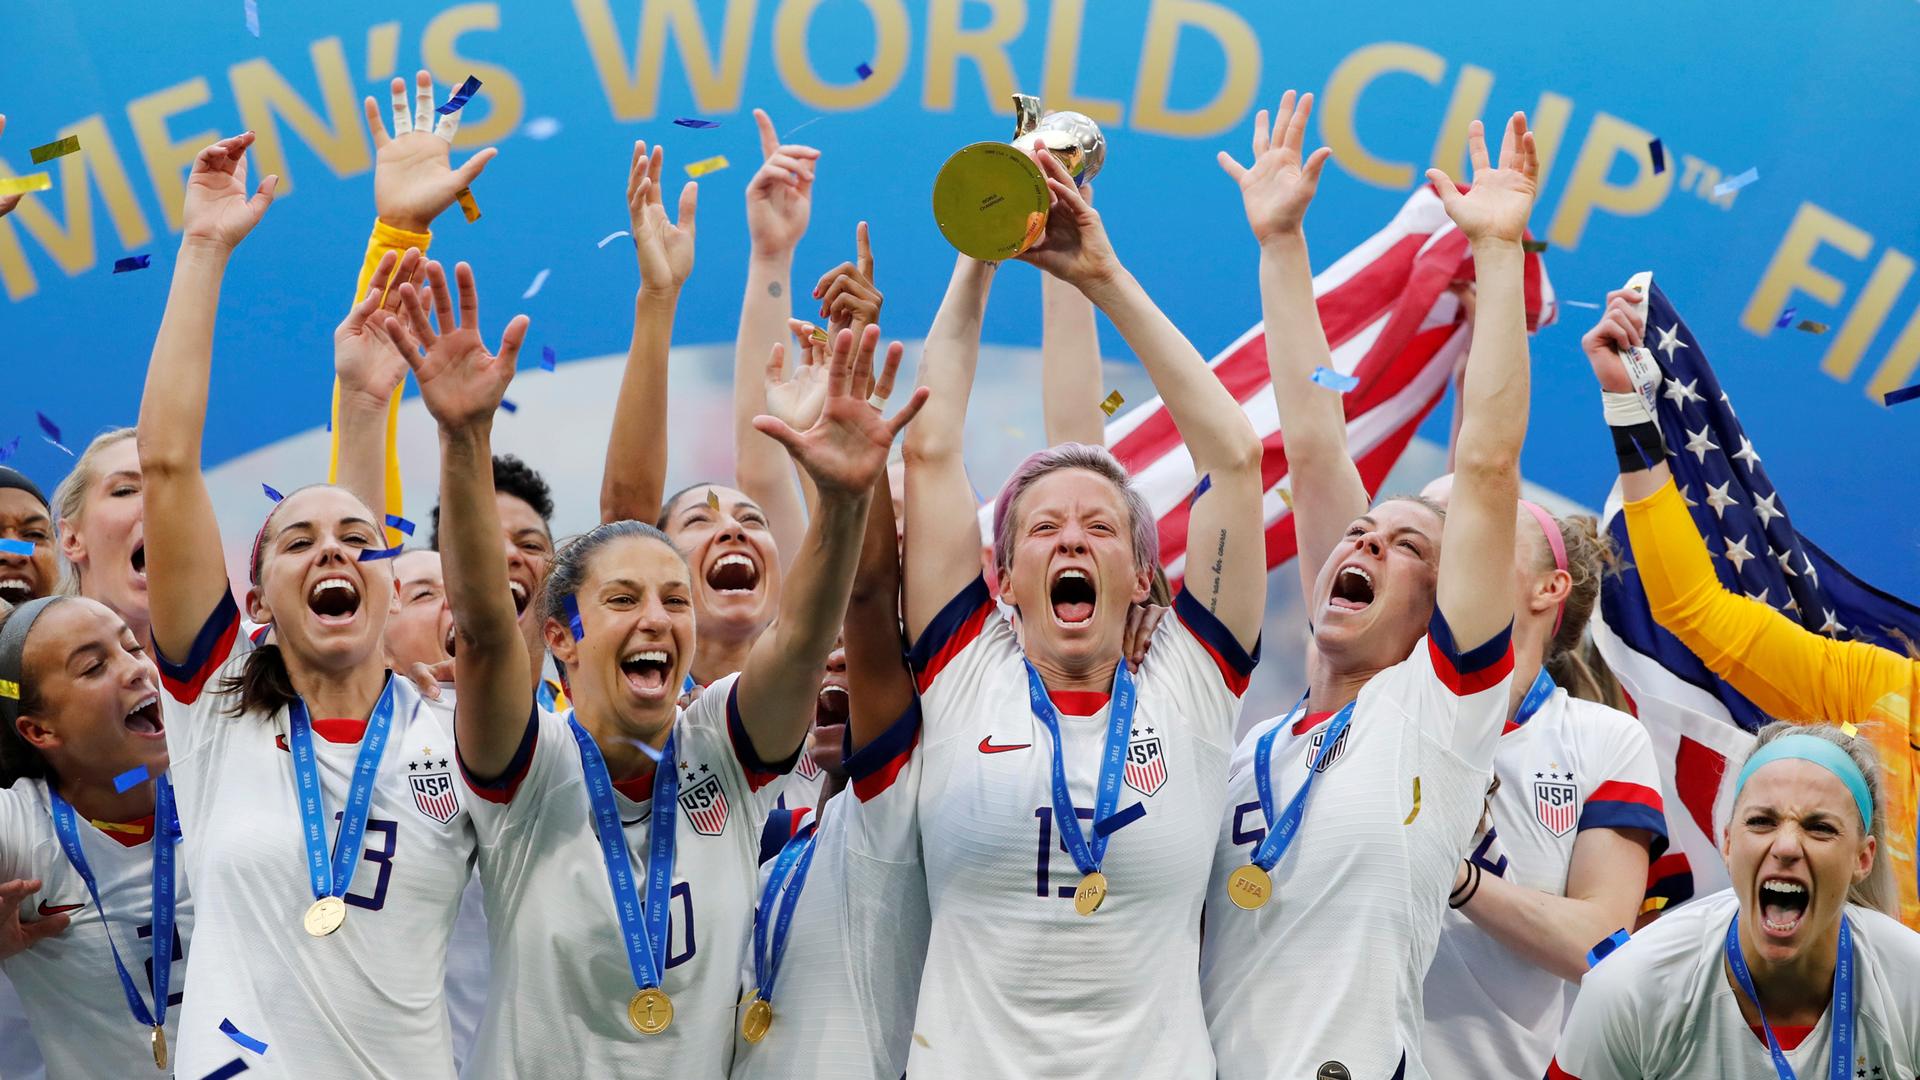 The US women's soccer team celebrates with the world cup trophy